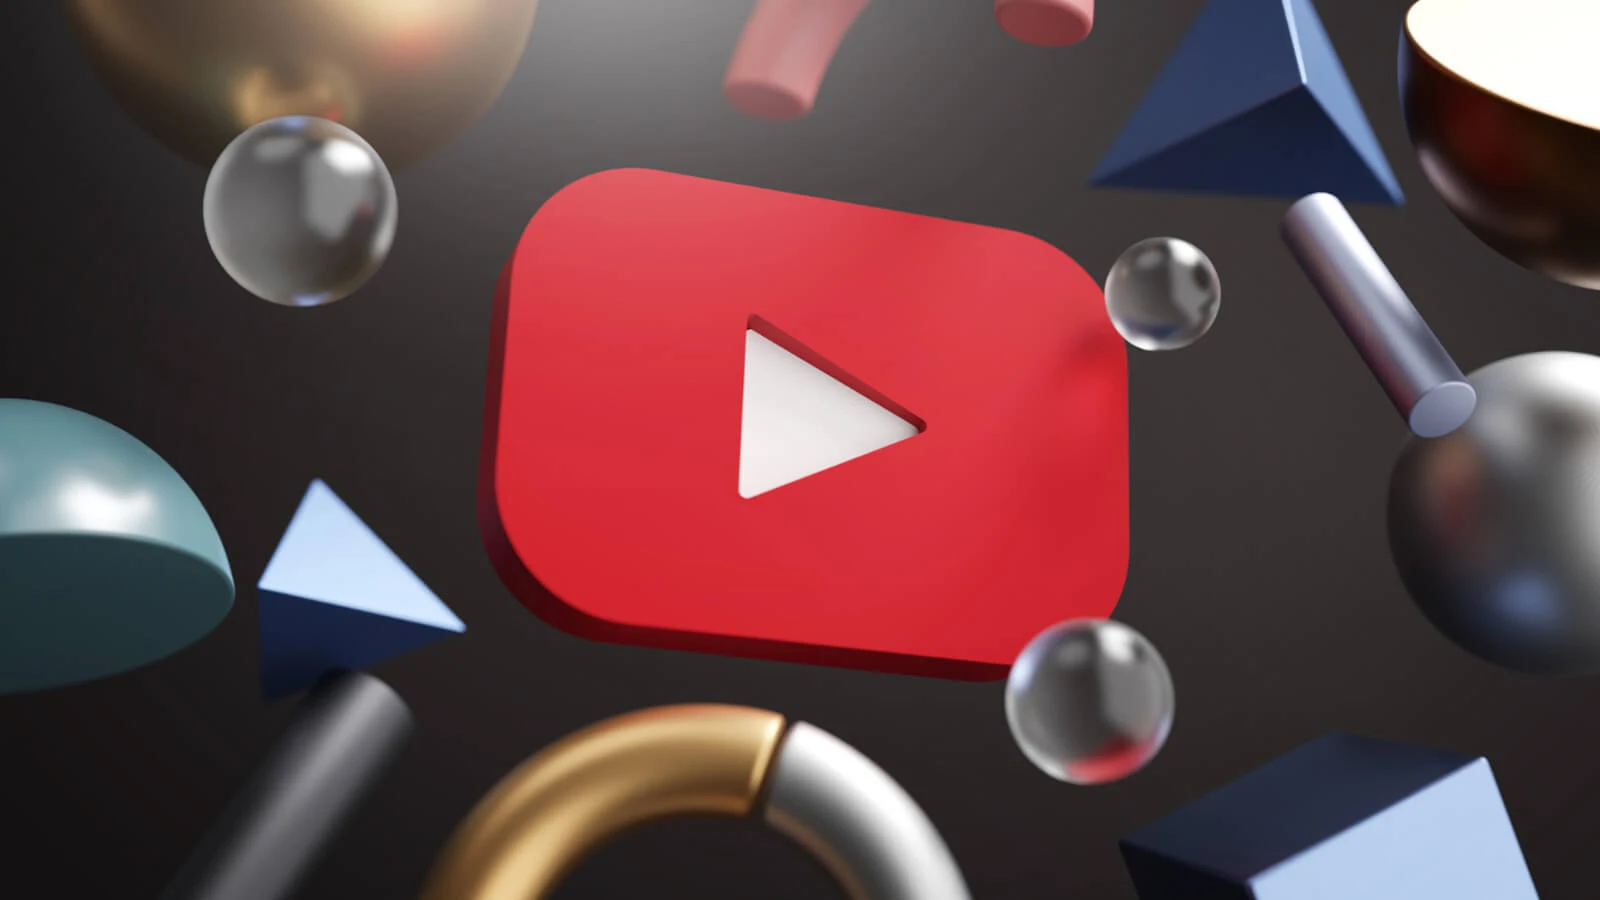 The Benefits of Using YouTube for Business